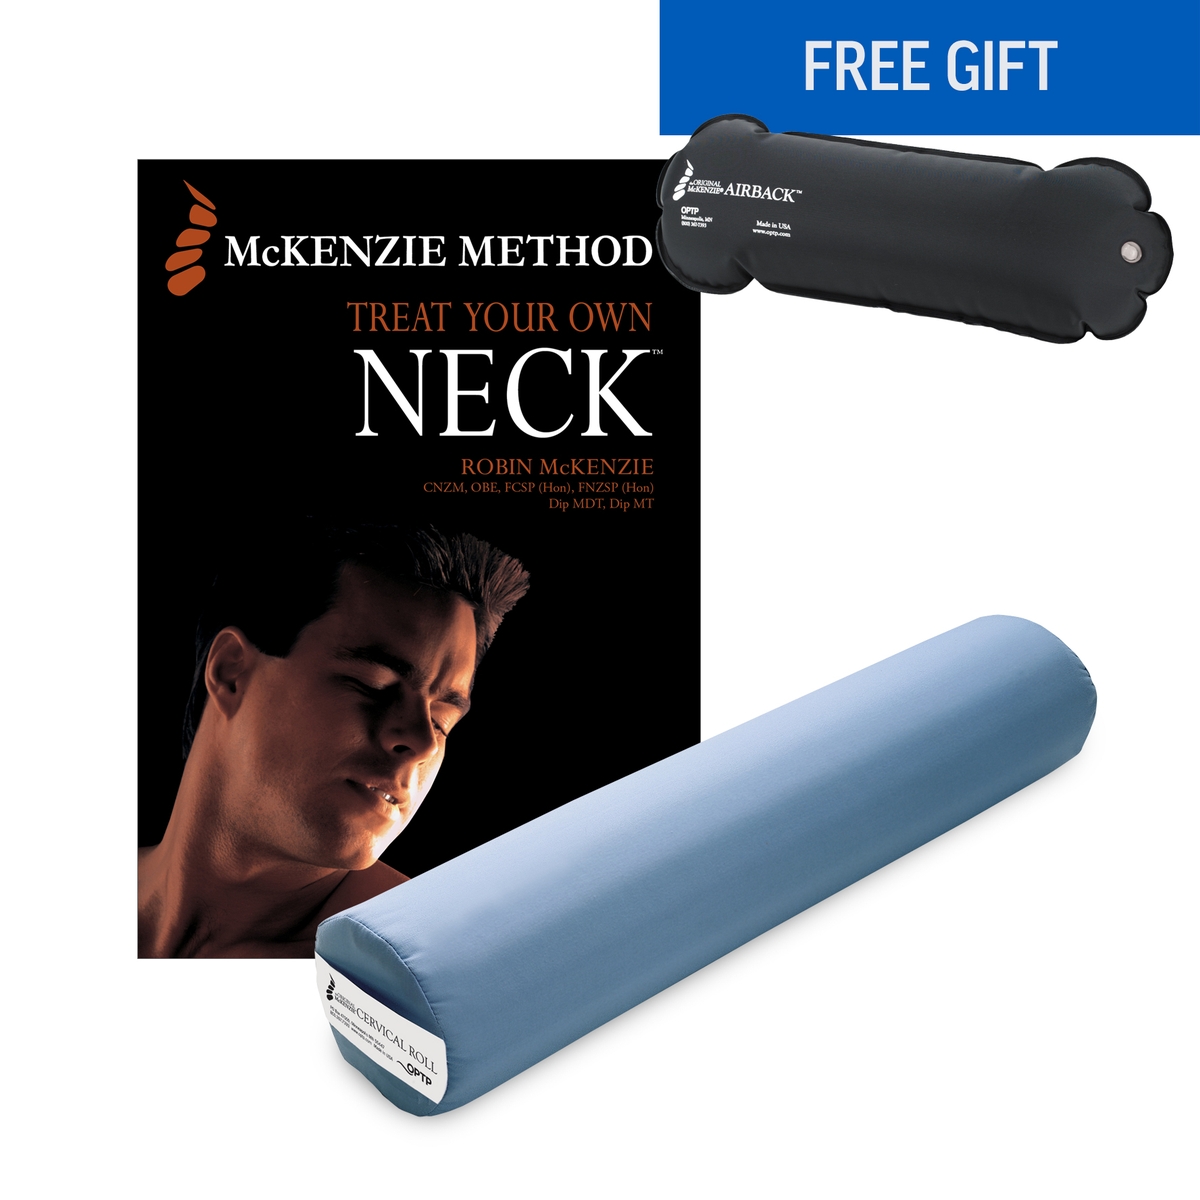 Treat Your Own Neck and McKenzie Cervical Roll Set